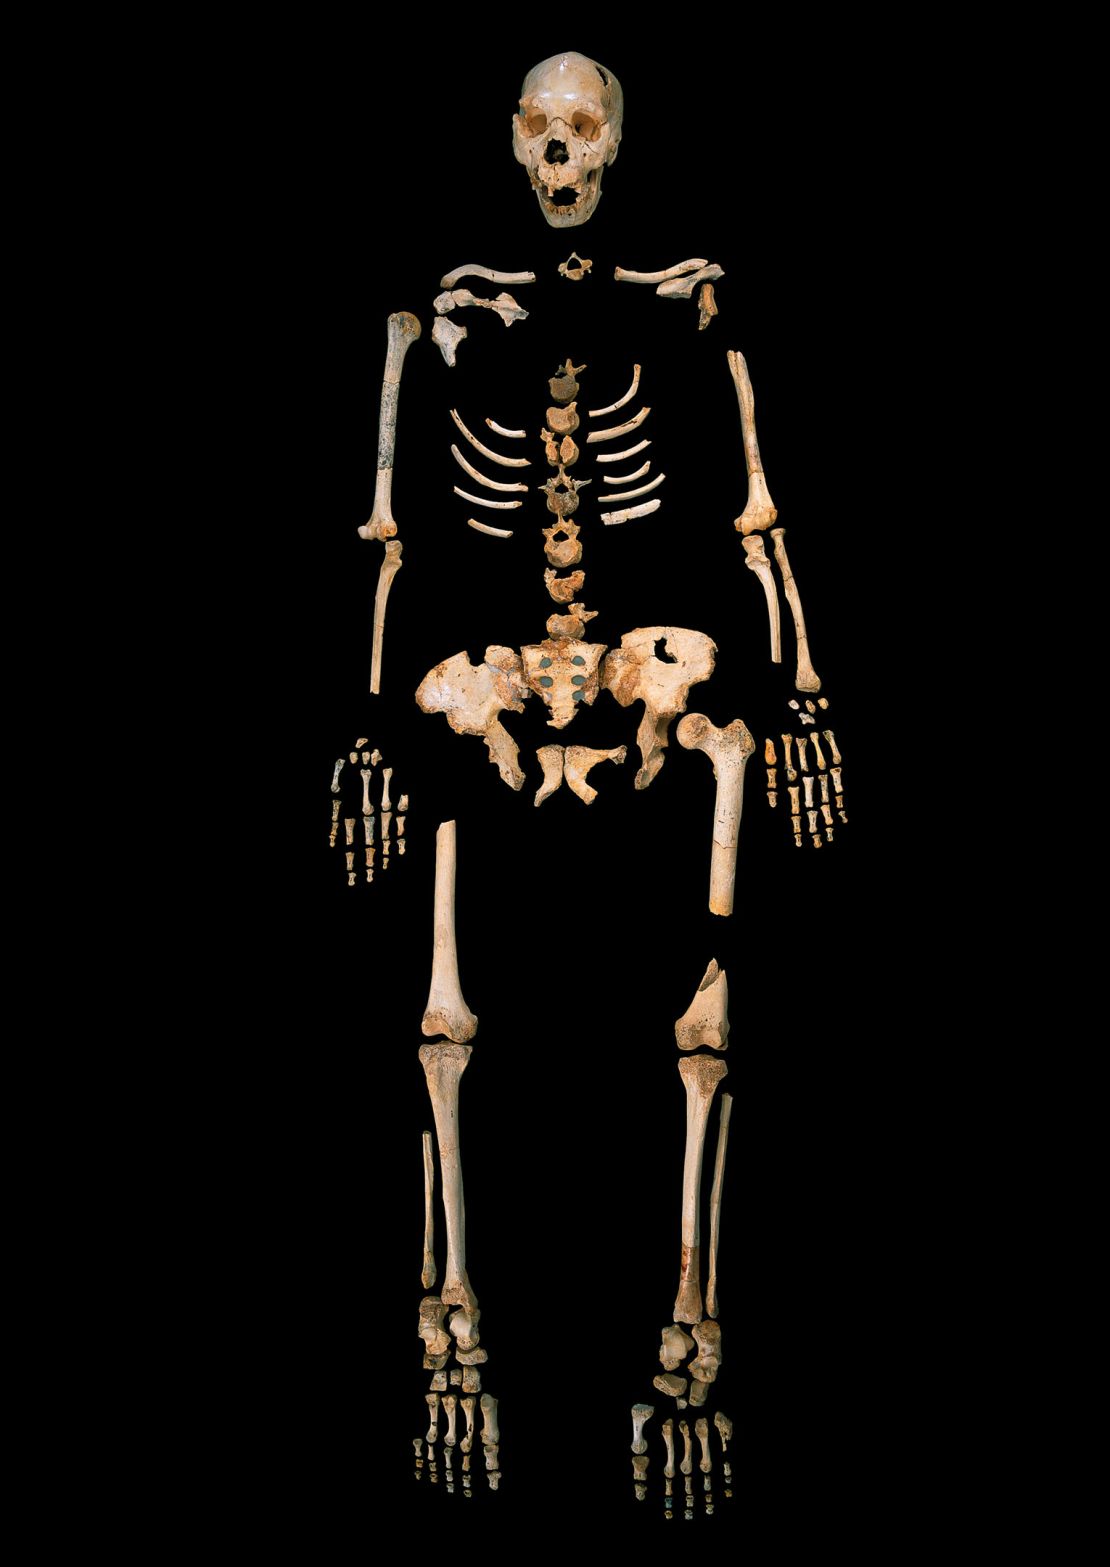 A skeleton of a Homo heidelbergensis representative from a cave site in Spain.